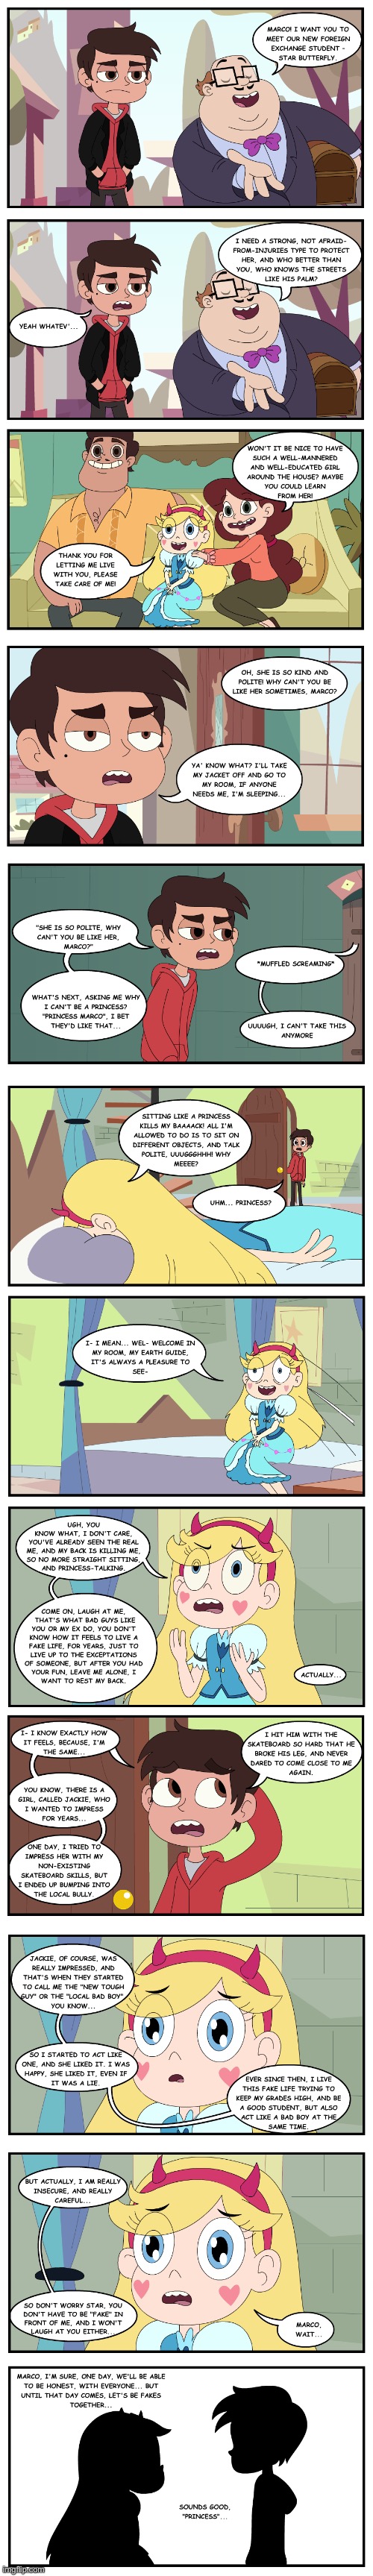 Rikoudu - Bad Boy Au | image tagged in comics,comics/cartoons,svtfoe,star vs the forces of evil,memes,stop reading the tags | made w/ Imgflip meme maker